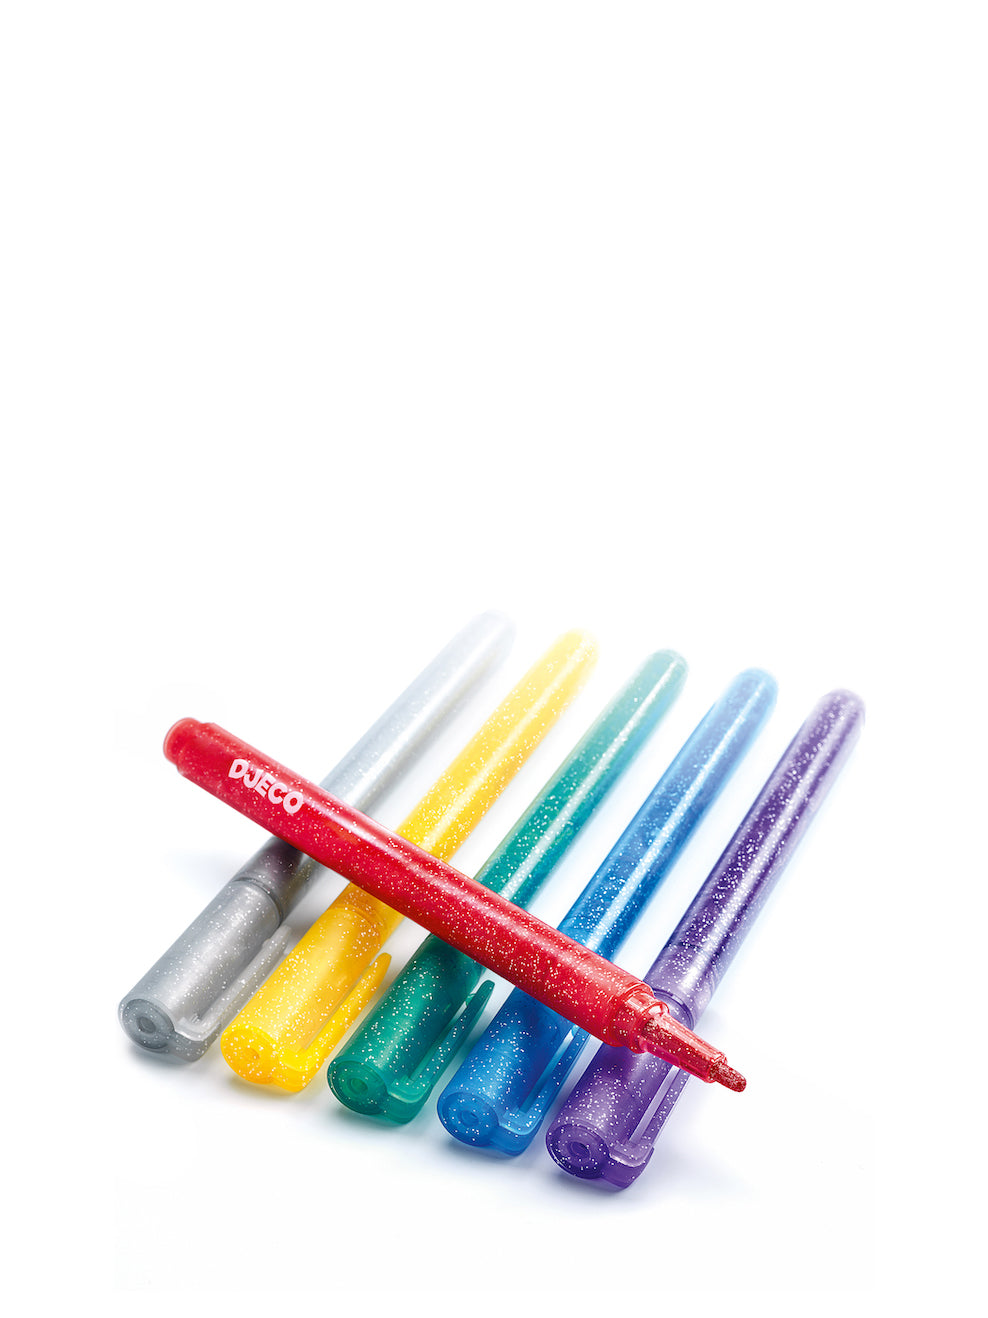 6 glitter markers: silver, yellow, green, blue, purple and red